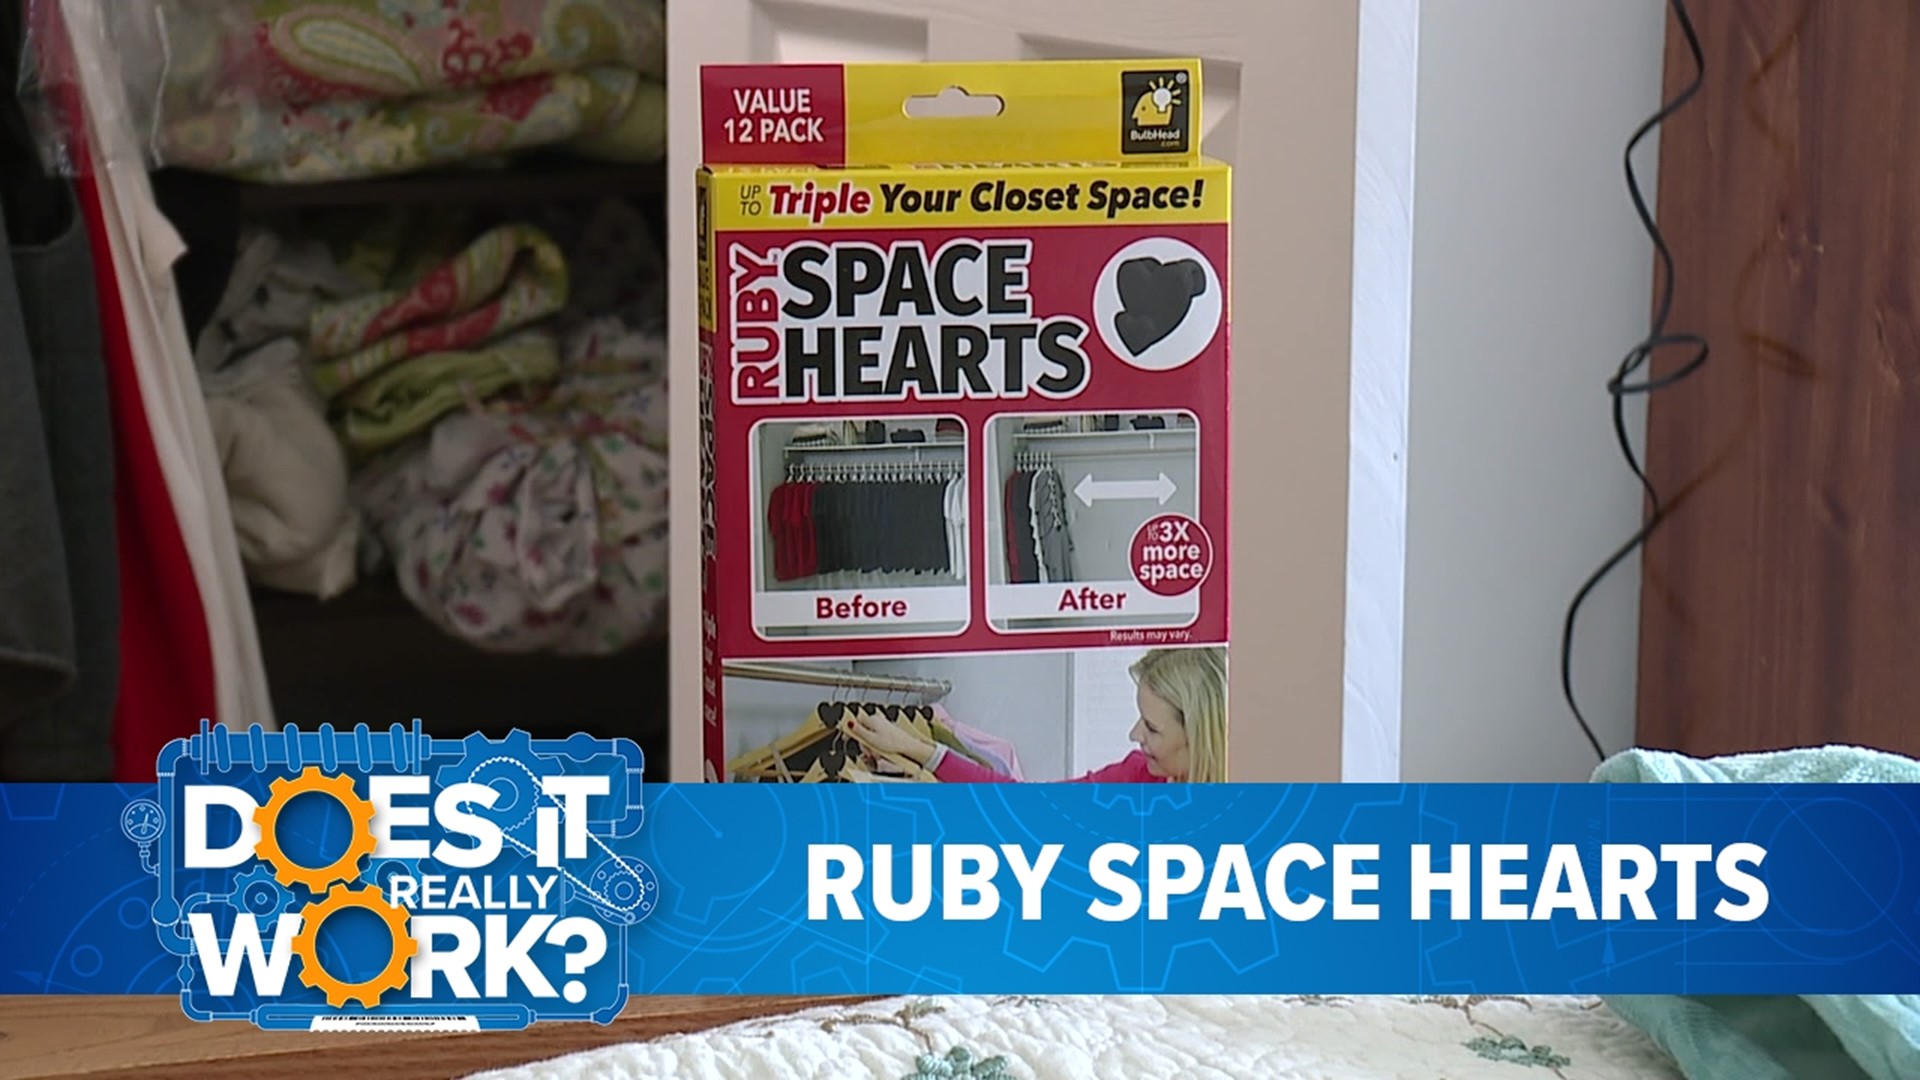 Ruby Space Hearts are small plastic hanger attachments that help create more closet space.